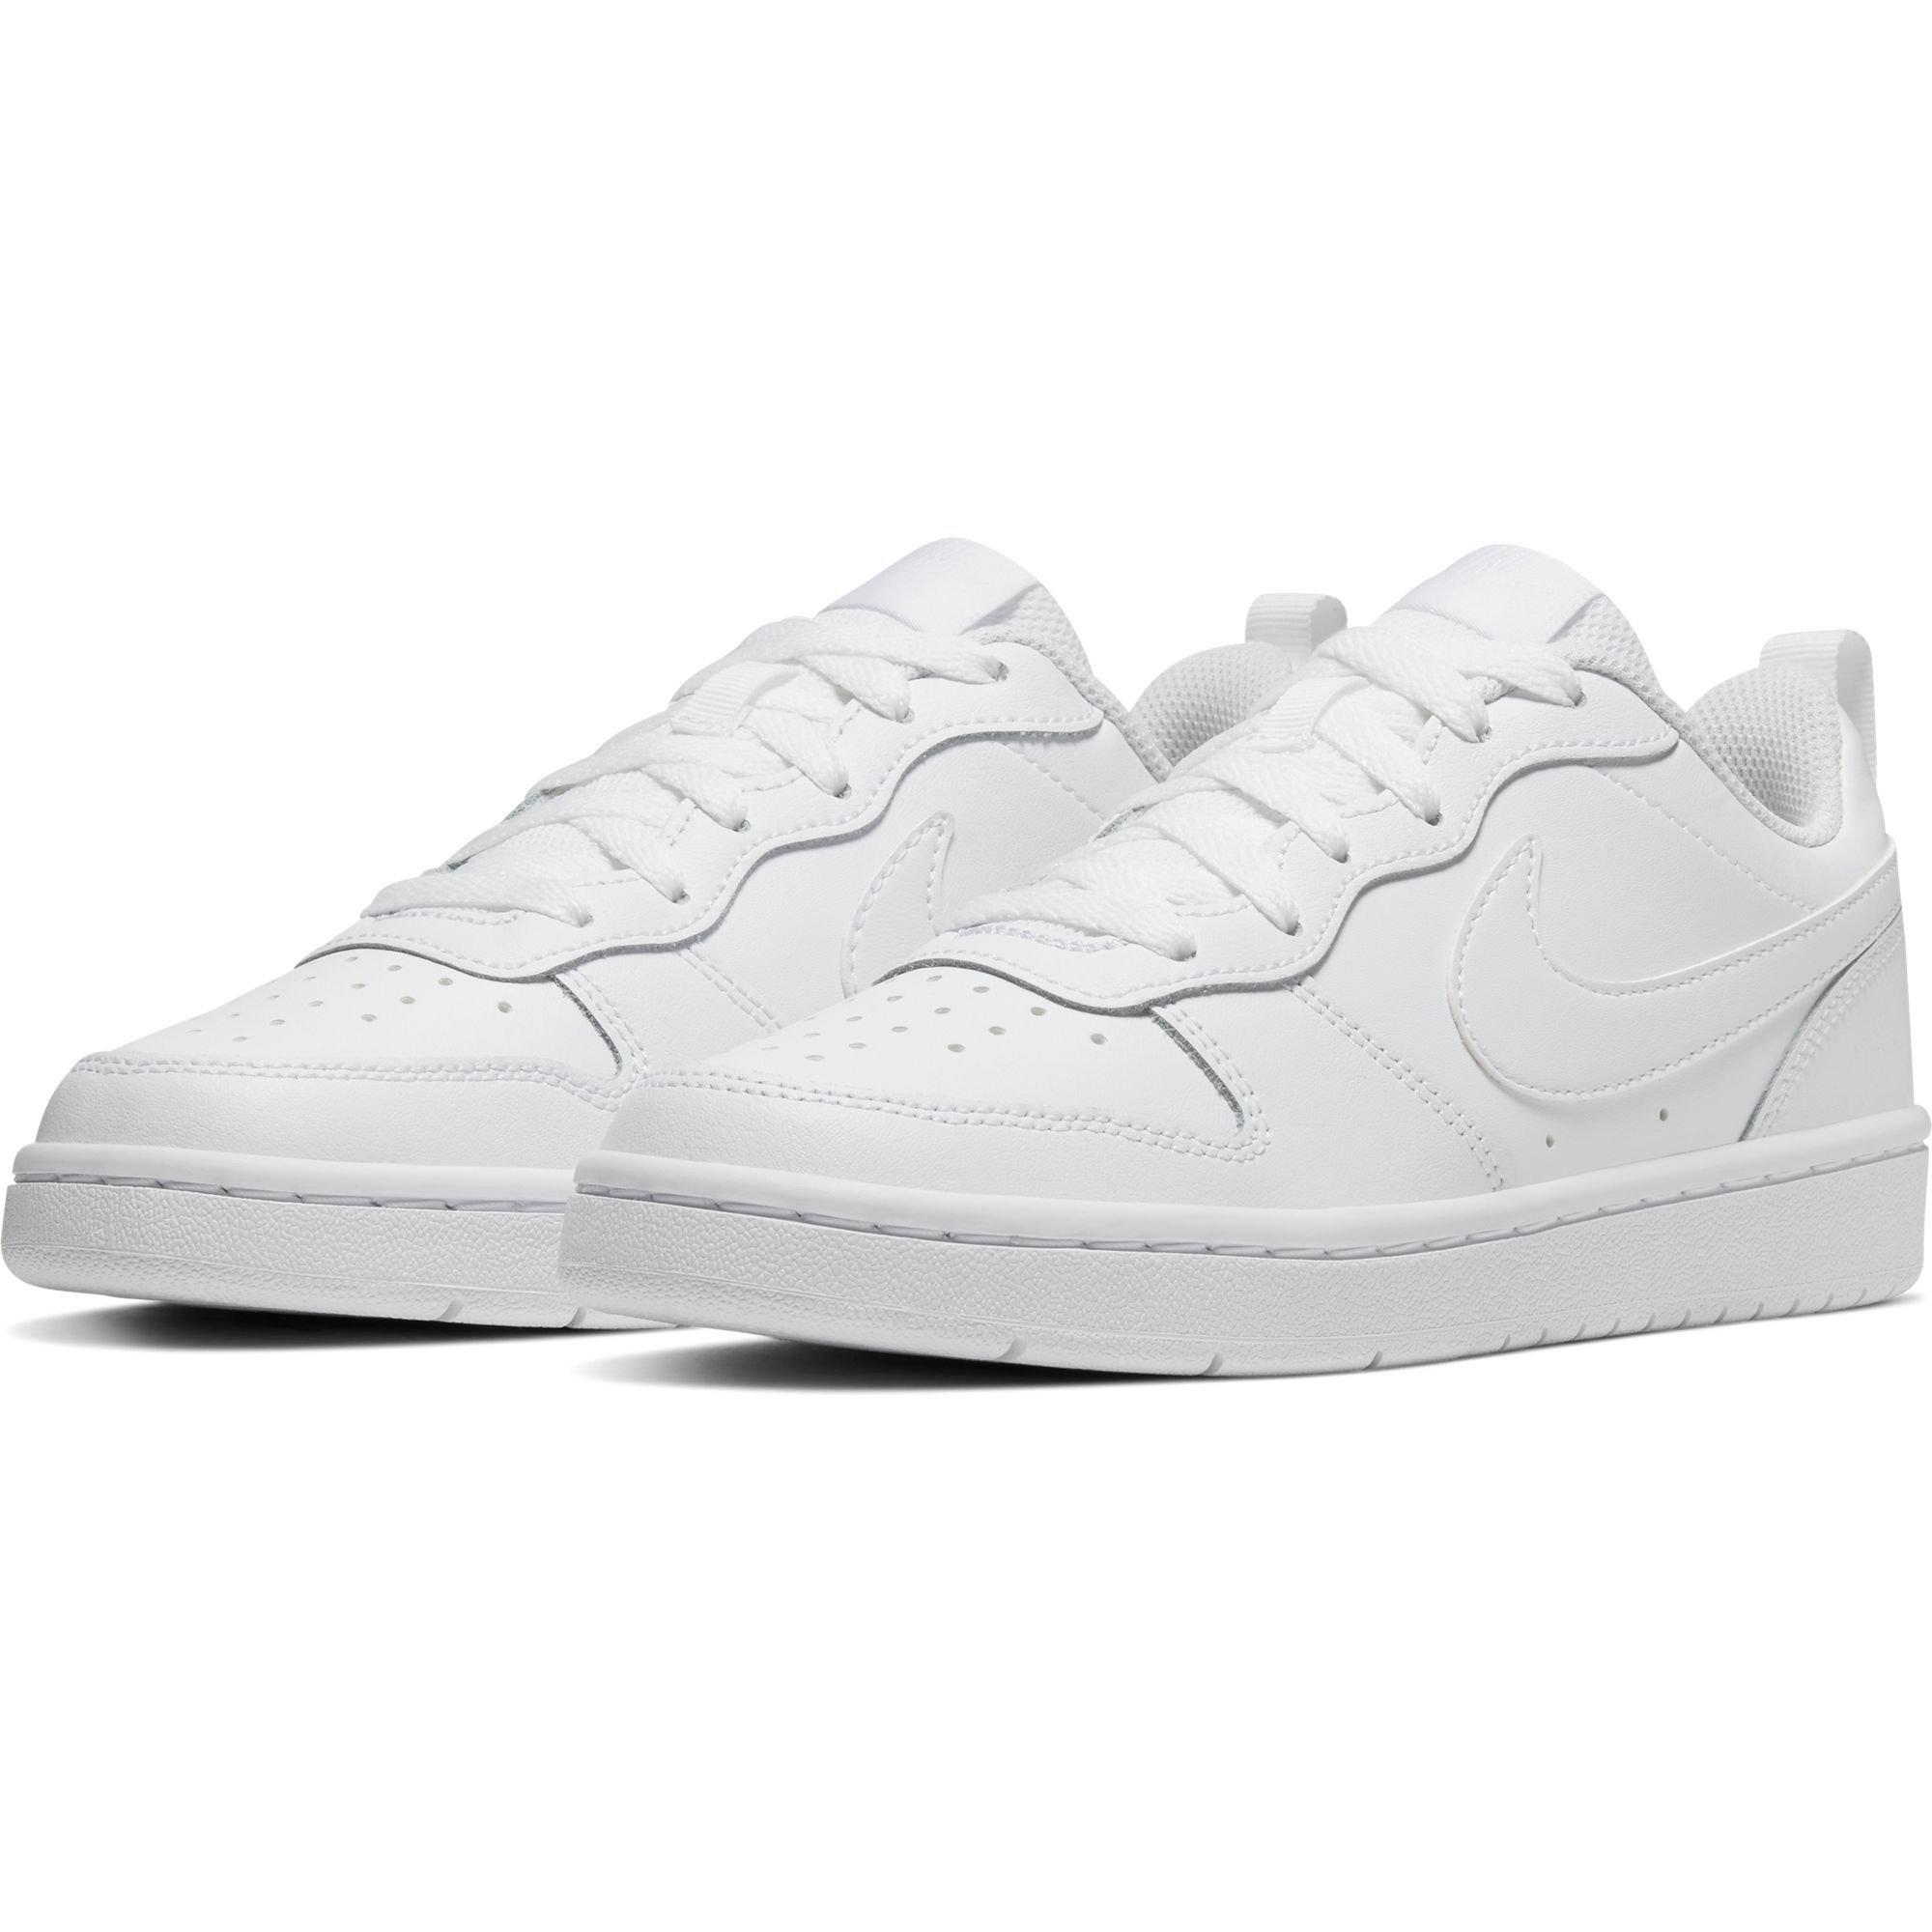 Size+6.5+%28GS%29+-+Nike+Court+Borough+2+SE+Low+White+Light+Madder+Root for  sale online